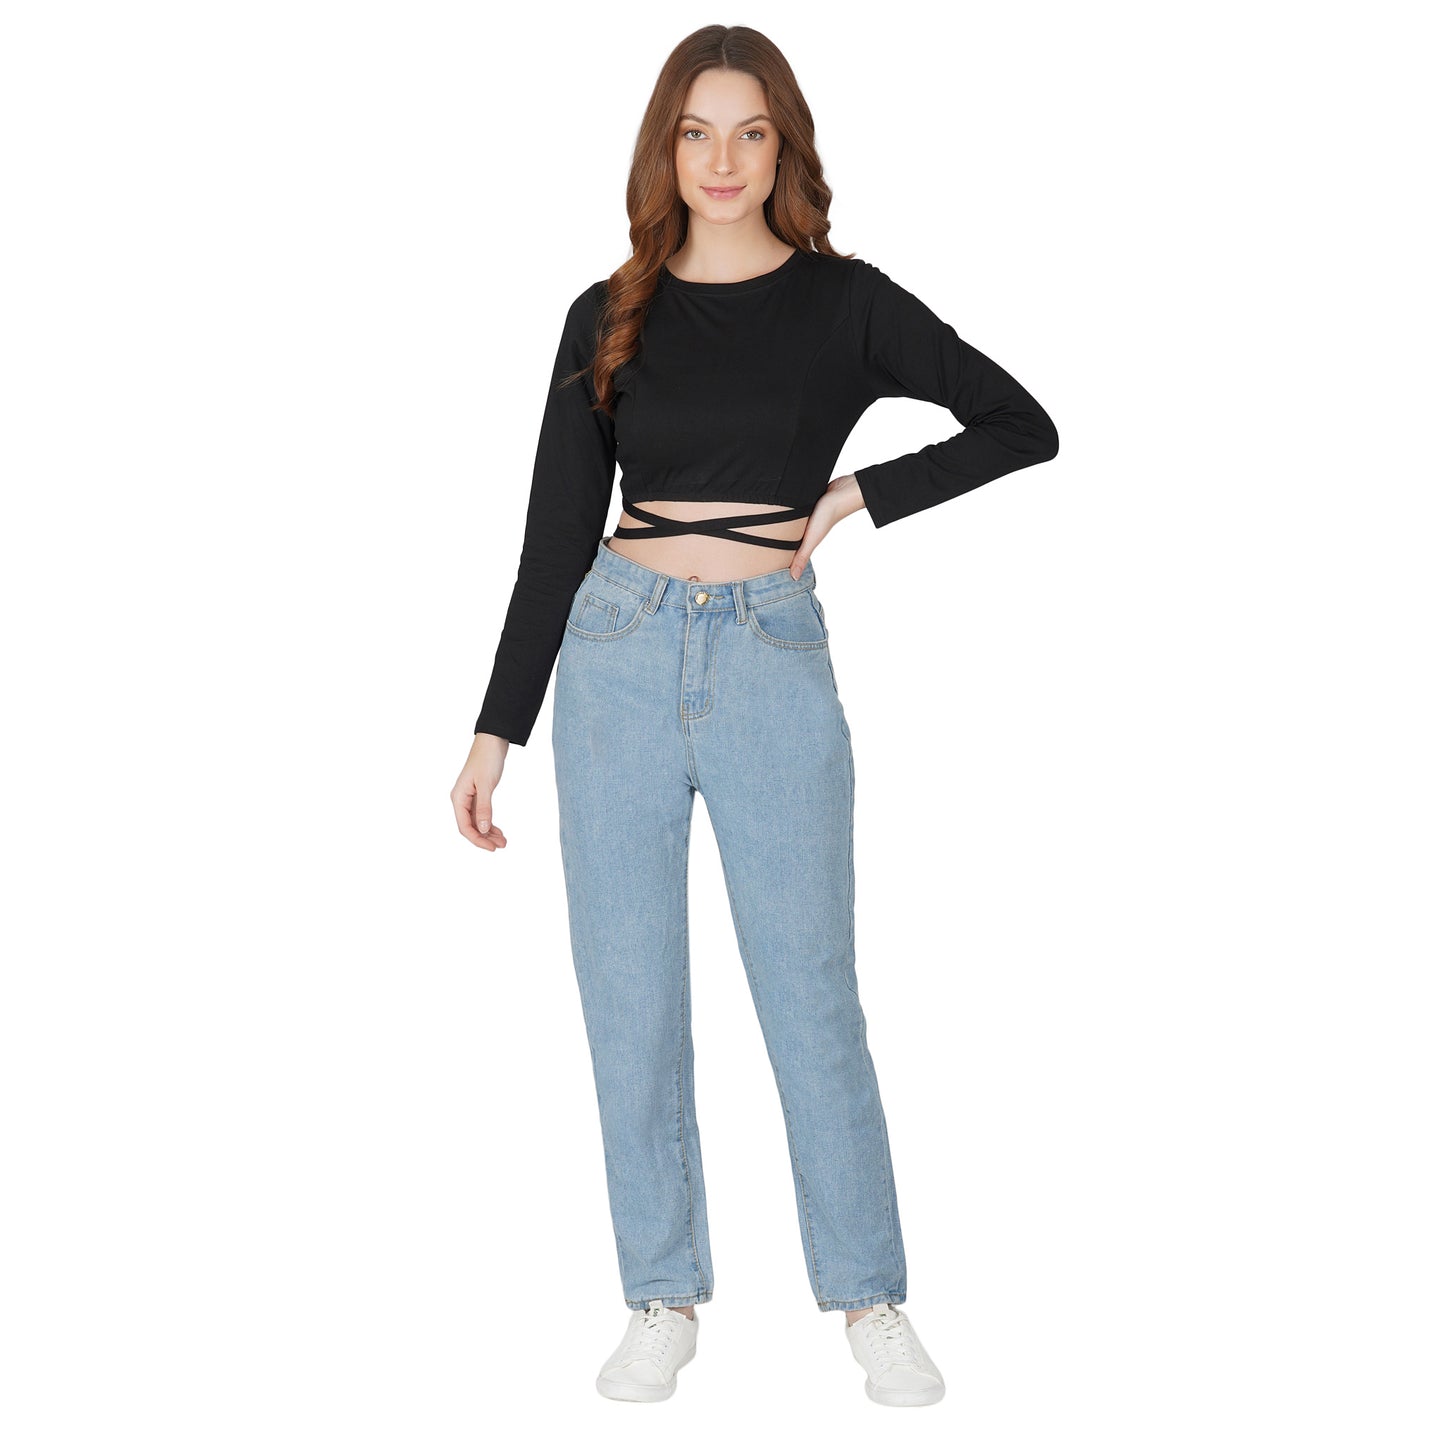 SLAY. Women's Black Full Sleeves Crop Top with Back Wrap around Strings-clothing-to-slay.myshopify.com-Crop Top